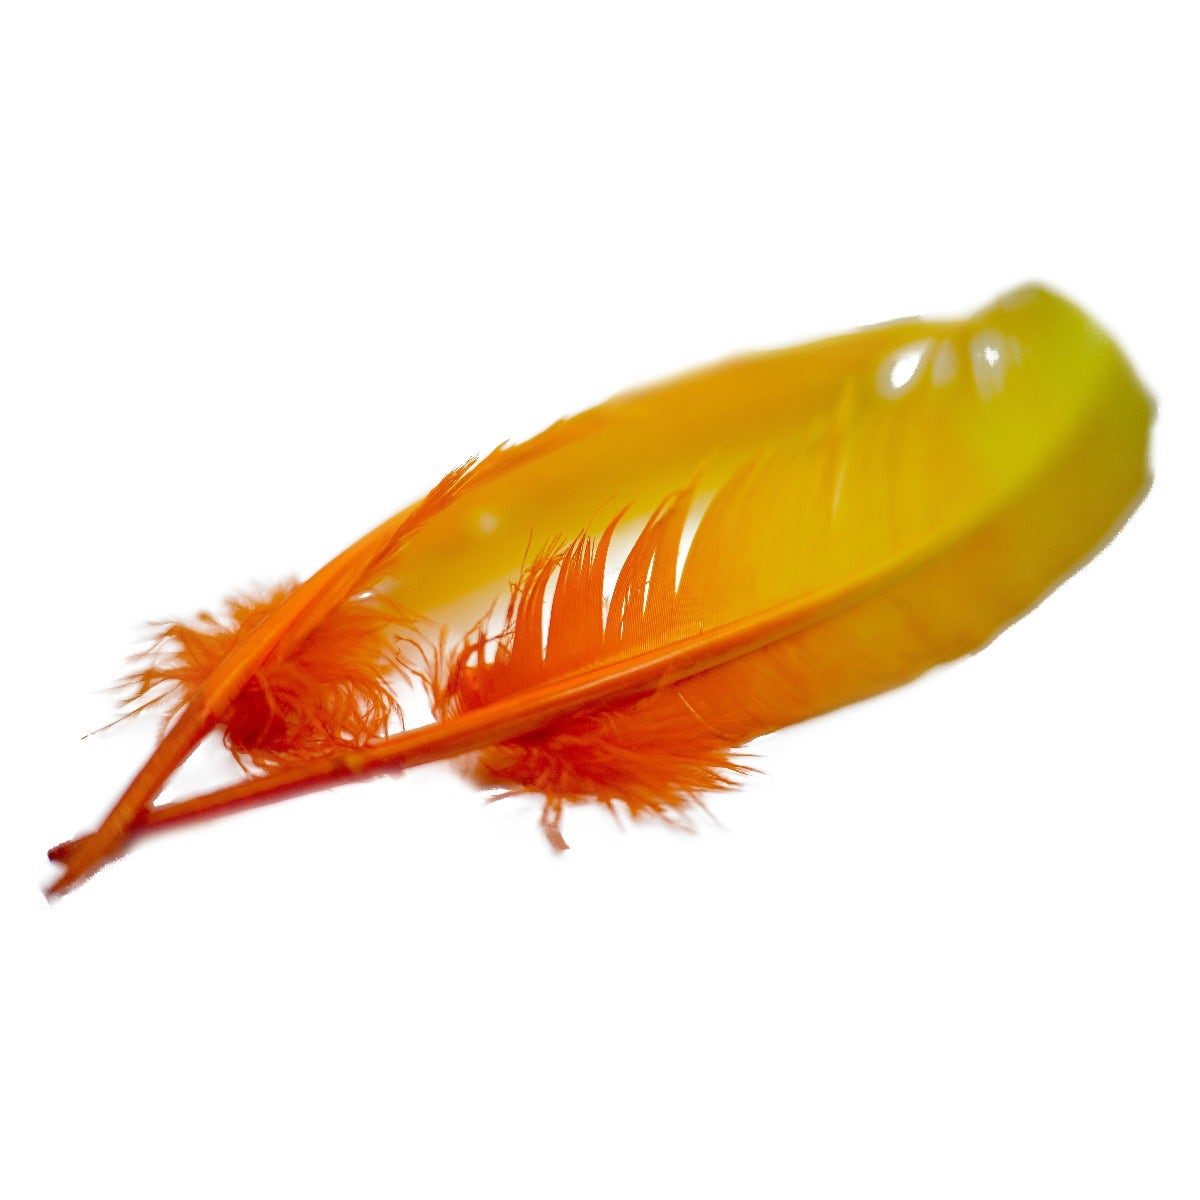 Ombré Turkey Quill Feathers 10-12” 2 pc- Gold - Orange